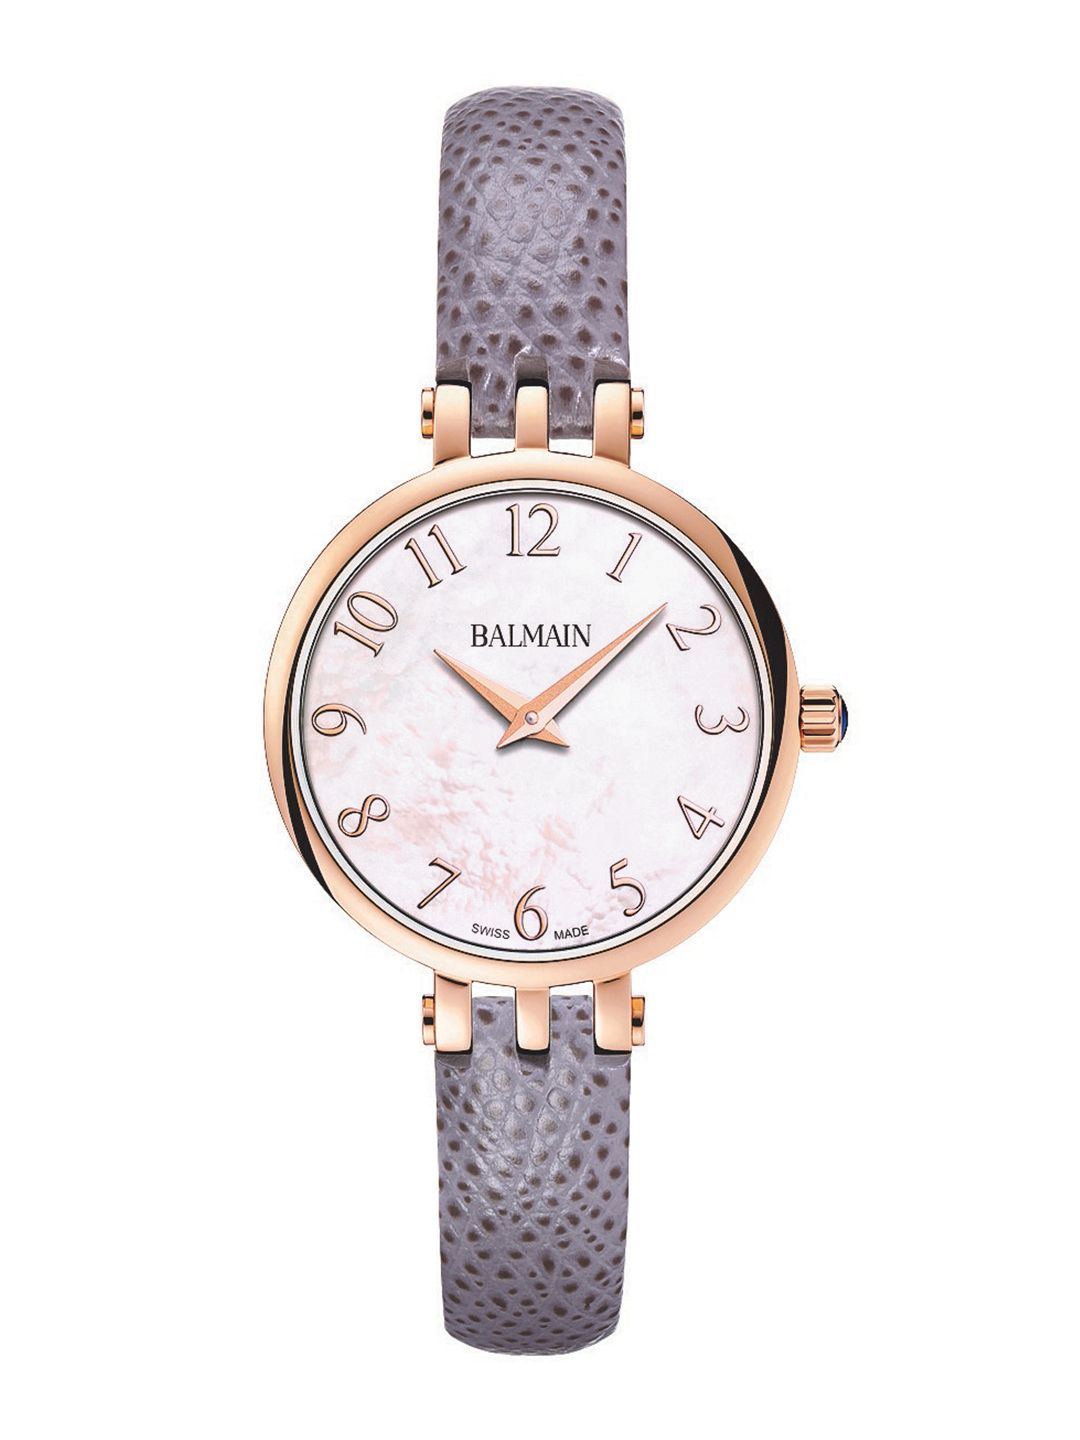 Balmain SEDIREA Women Off-White Swiss Made Mother of Pearl Analogue Watch B42997284 Price in India